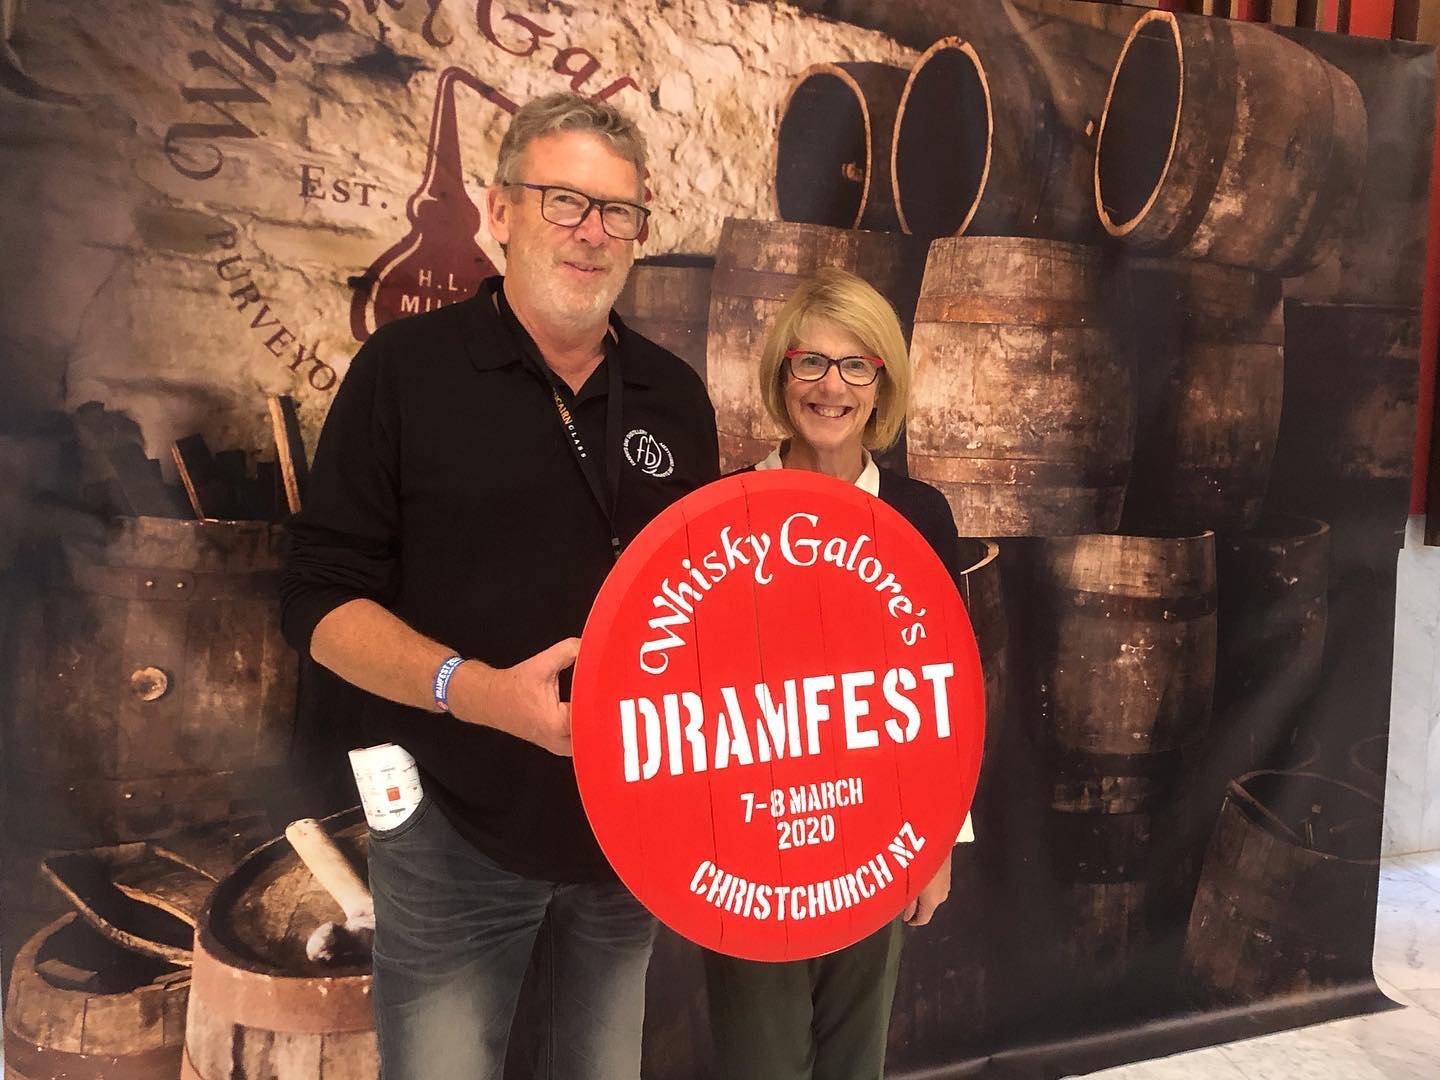 Here’s an update to today’s podcast episode…after it was released, we got word that the new COVID restrictions in New Zealand have forced the postponement of next month’s Whisky Galore DramFest in Christchurch. The new date will be announced when it’s confirmed.